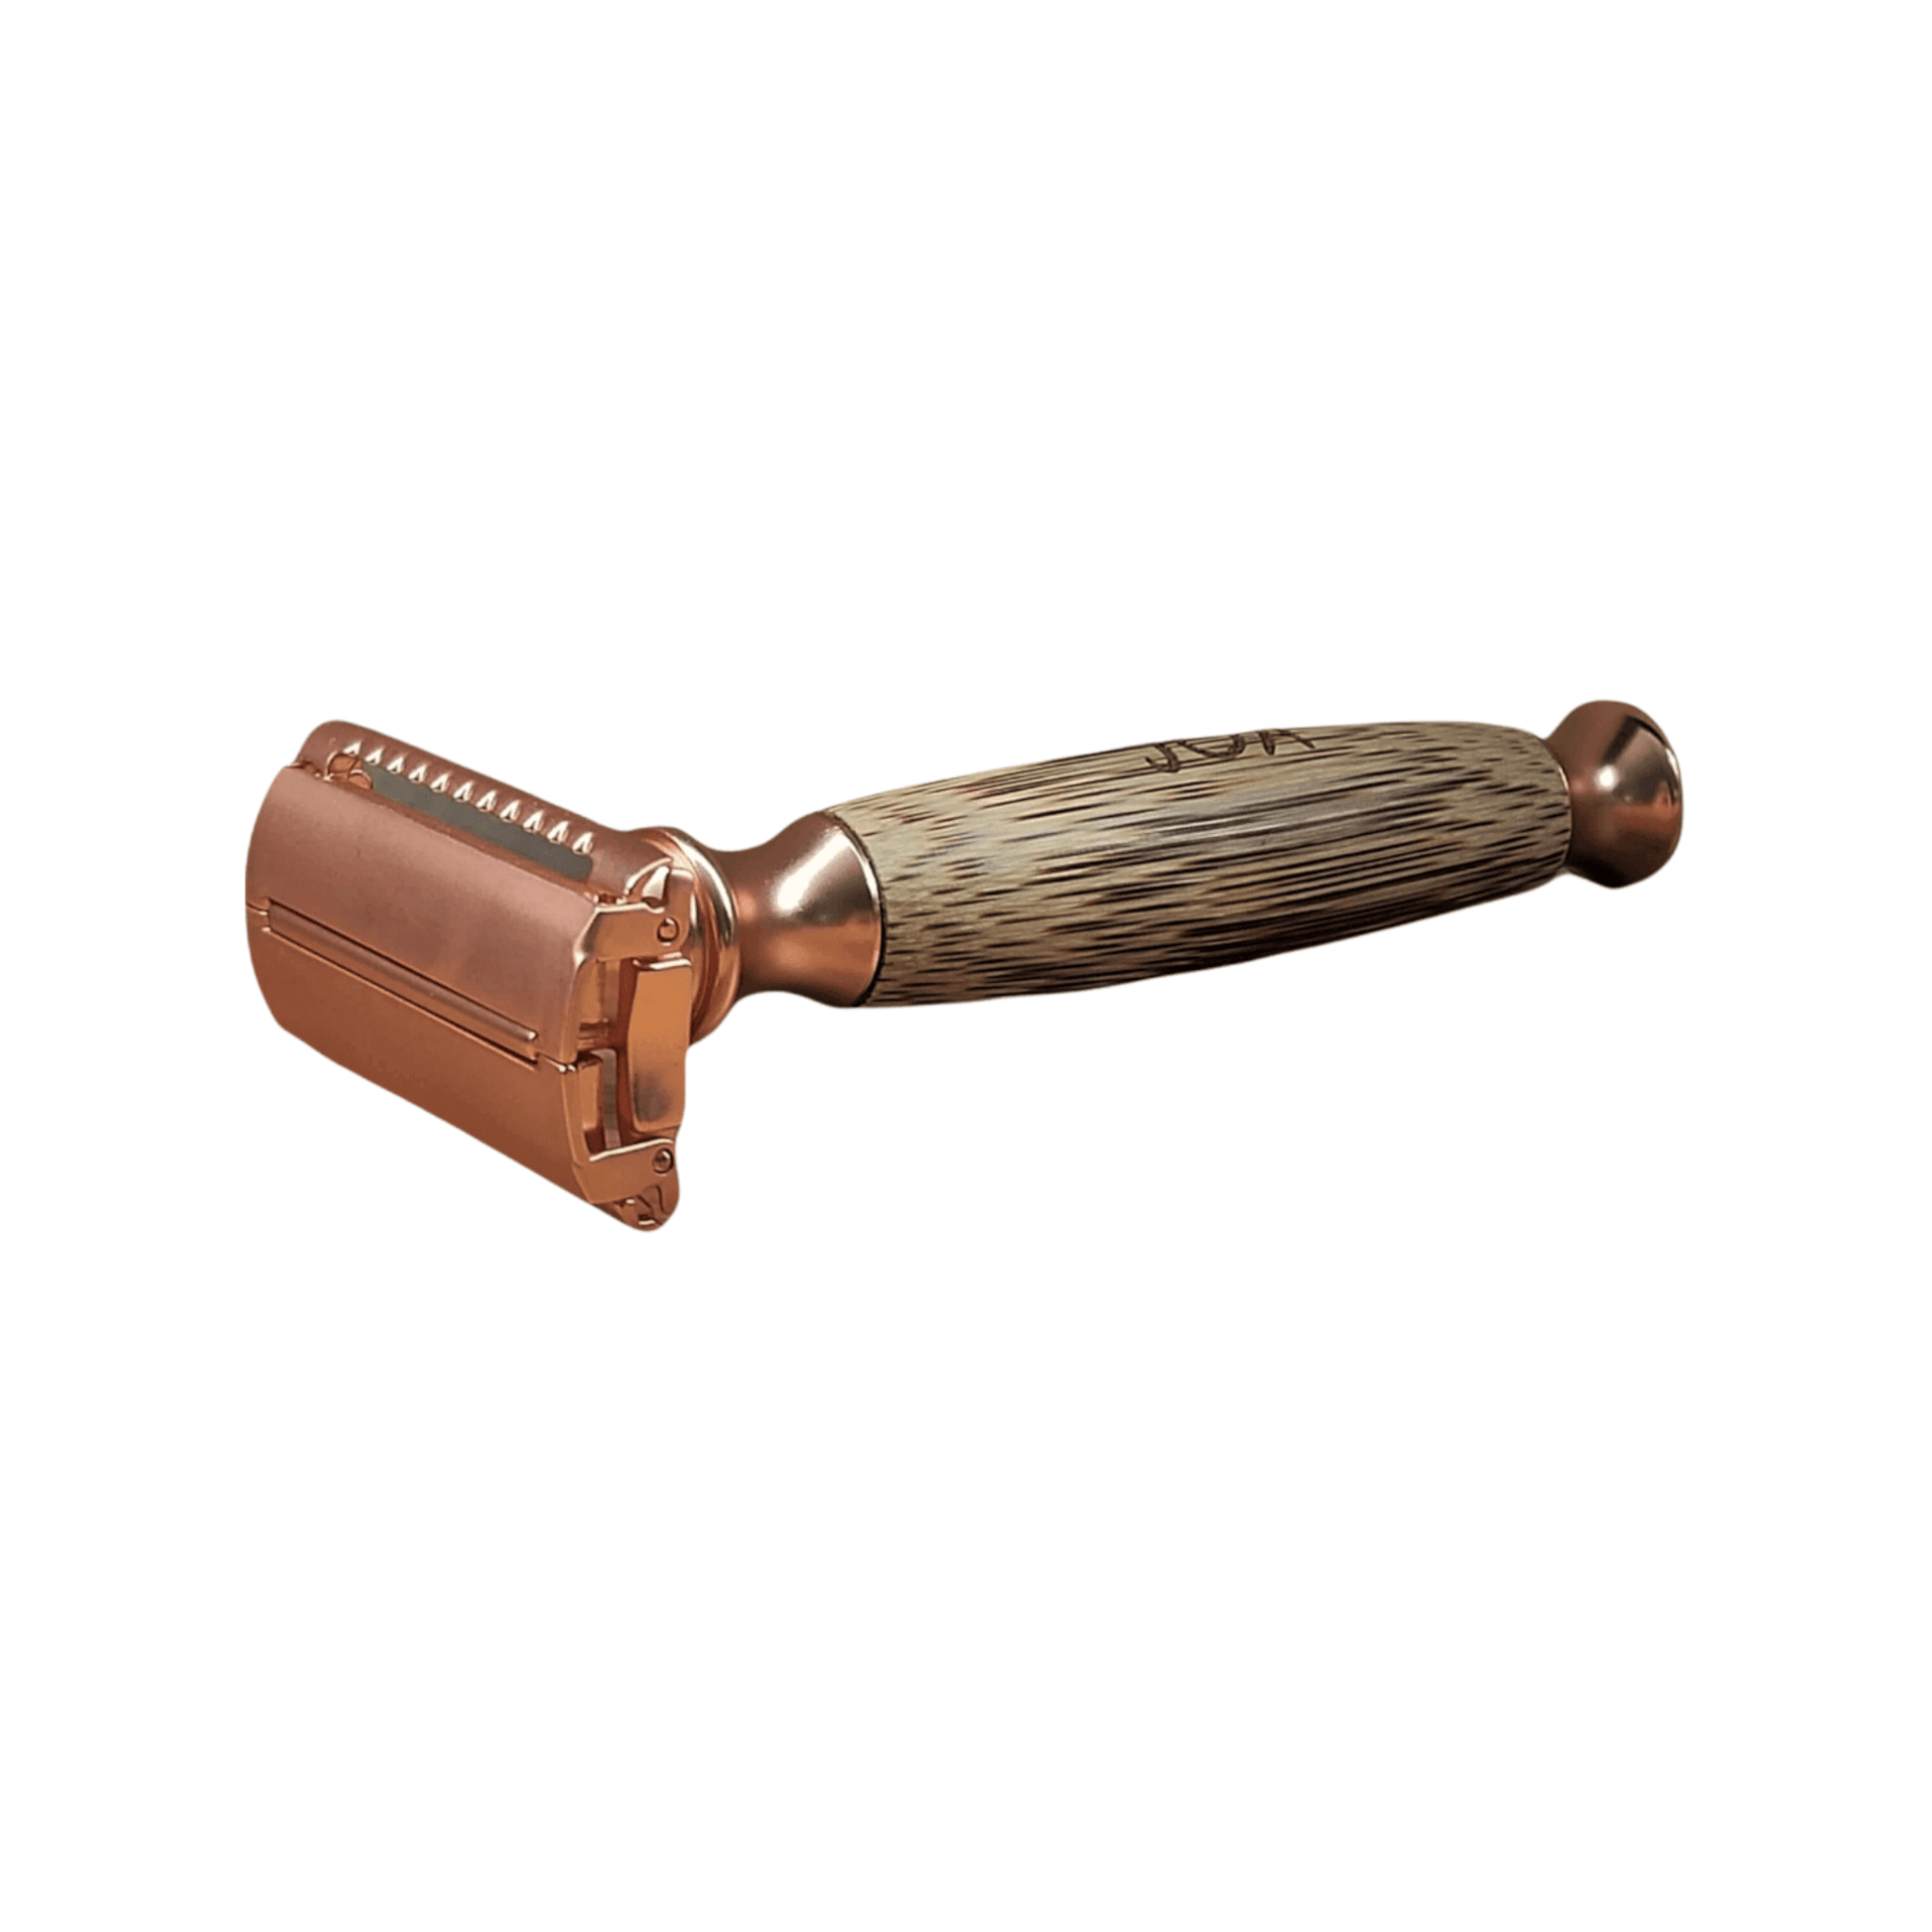 The Best Double Edge Bamboo Safety Razor, an eco-friendly, long-lasting and durable safety razor that every woman must have.